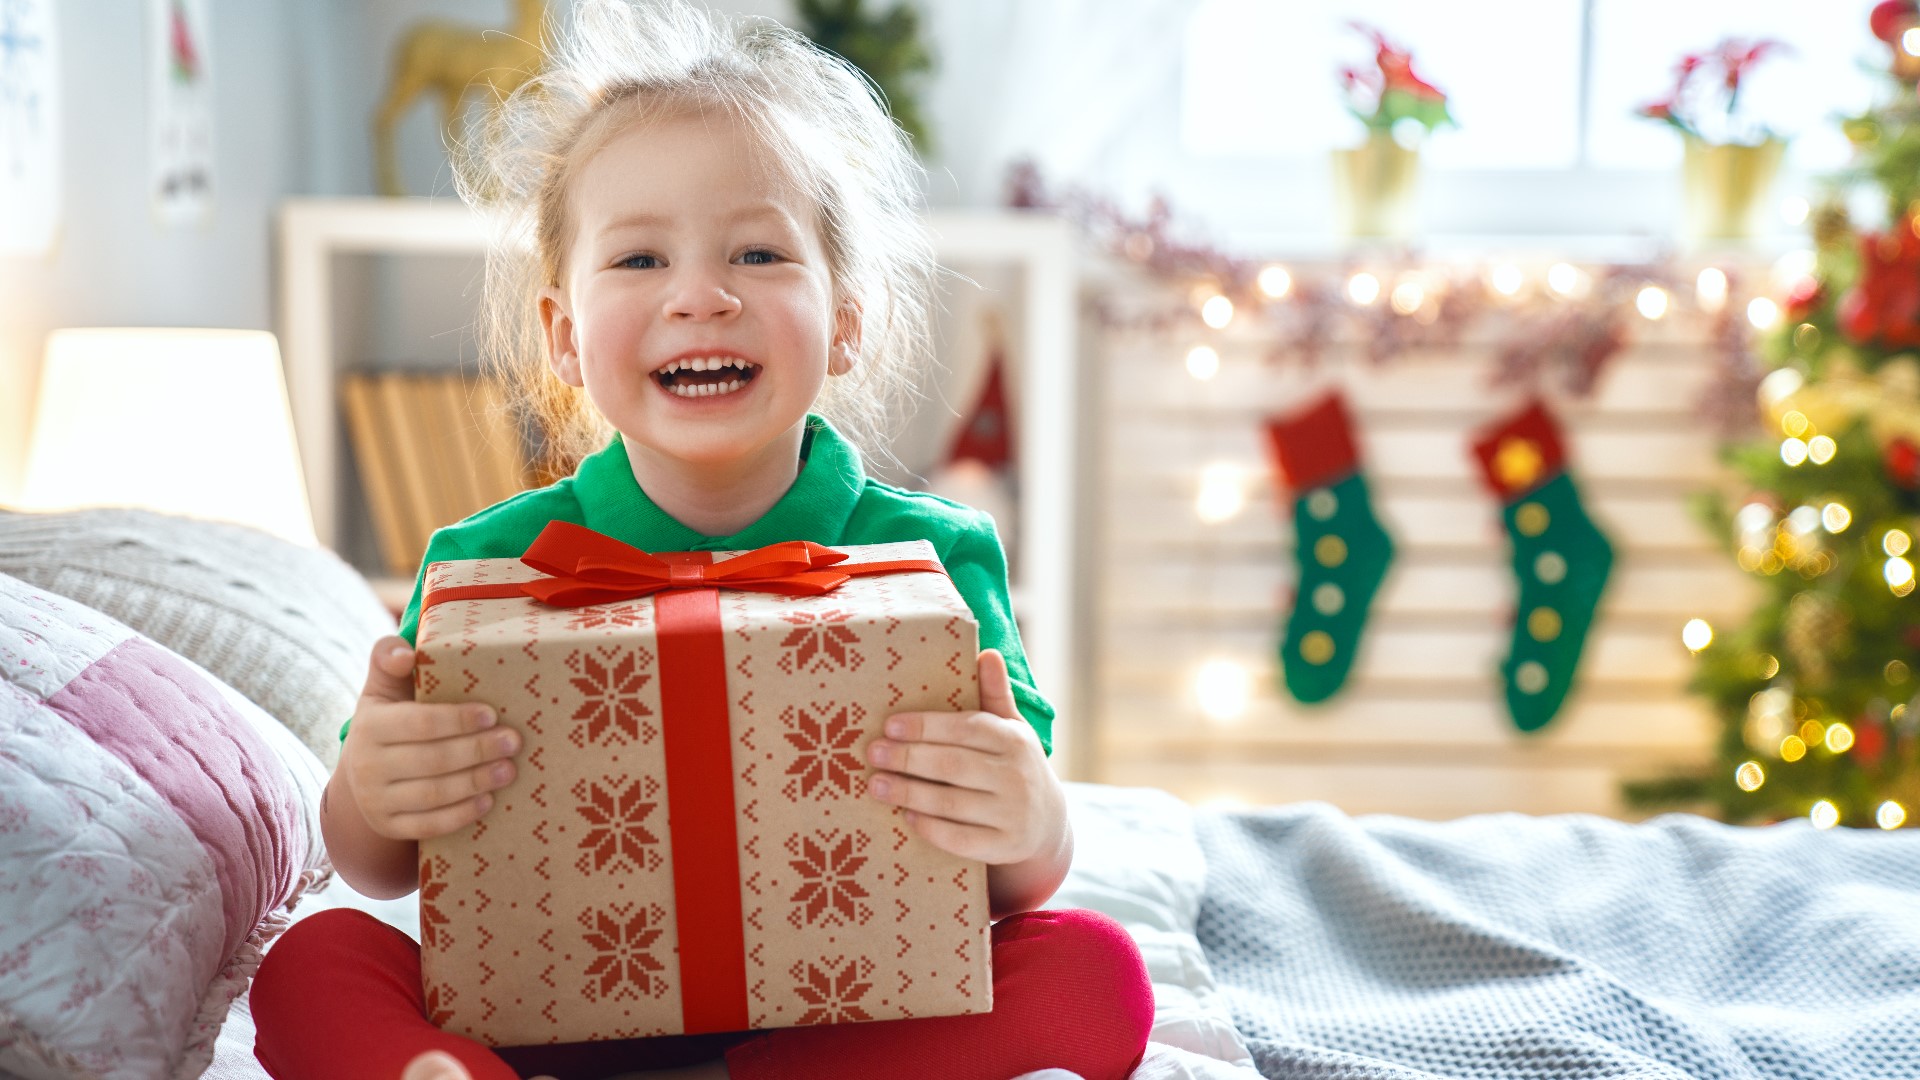 Finding the perfect holiday gift for kids can be stressful, especially this year. We talked to toy expert and president of Toy Tips, Marianne Szymanski.